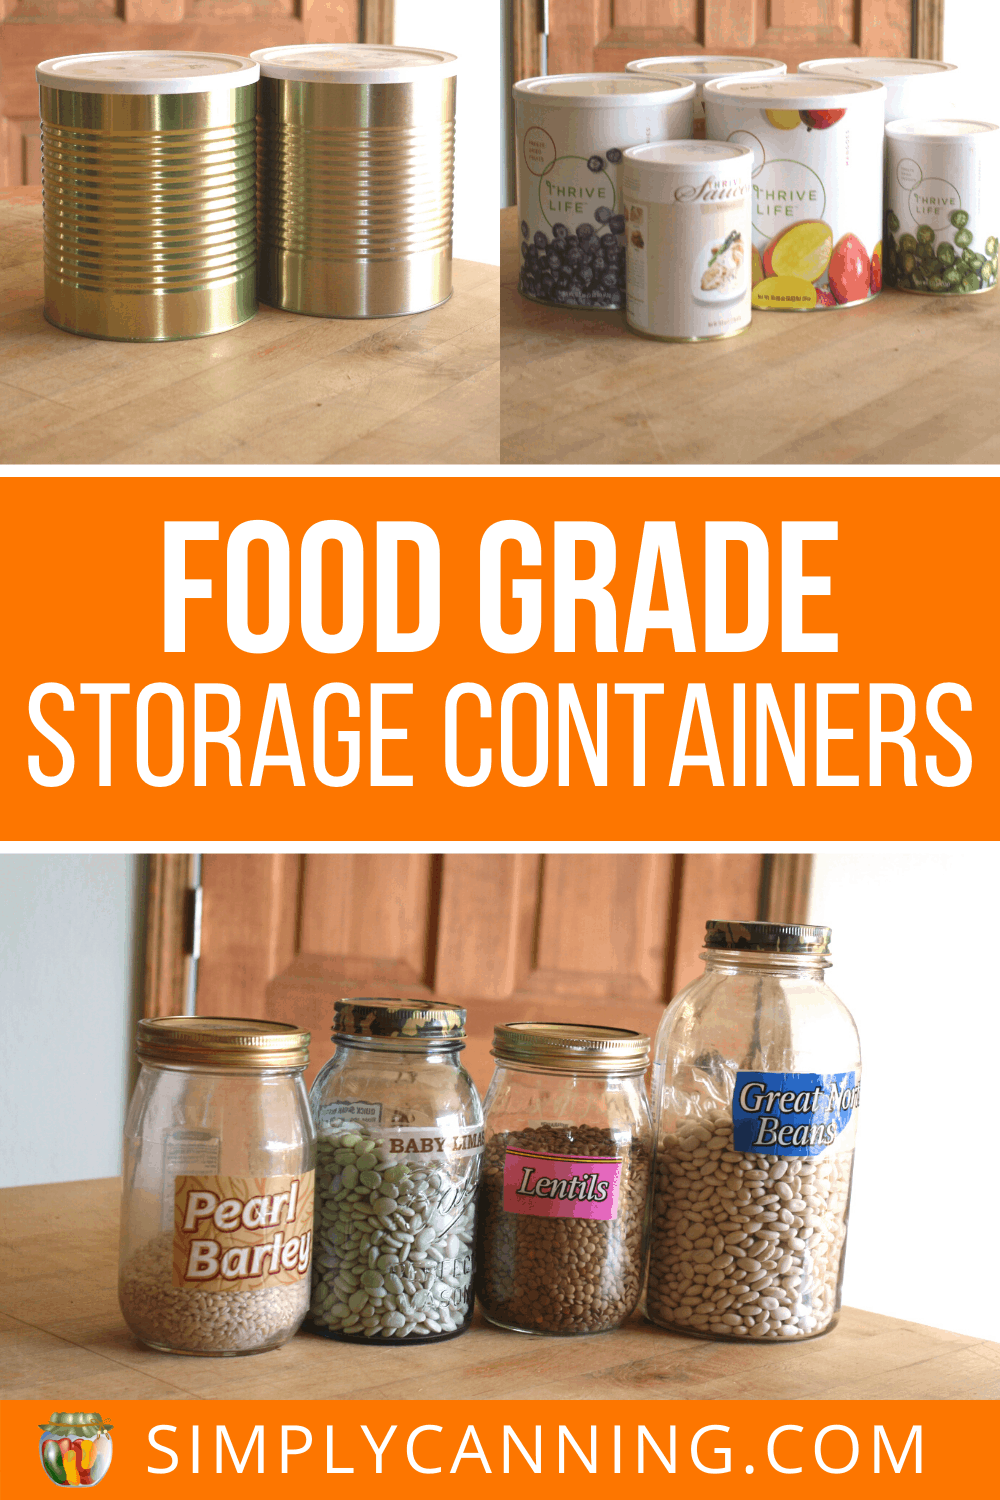 https://www.simplycanning.com/wp-content/uploads/foodgrade-container-pin1.png